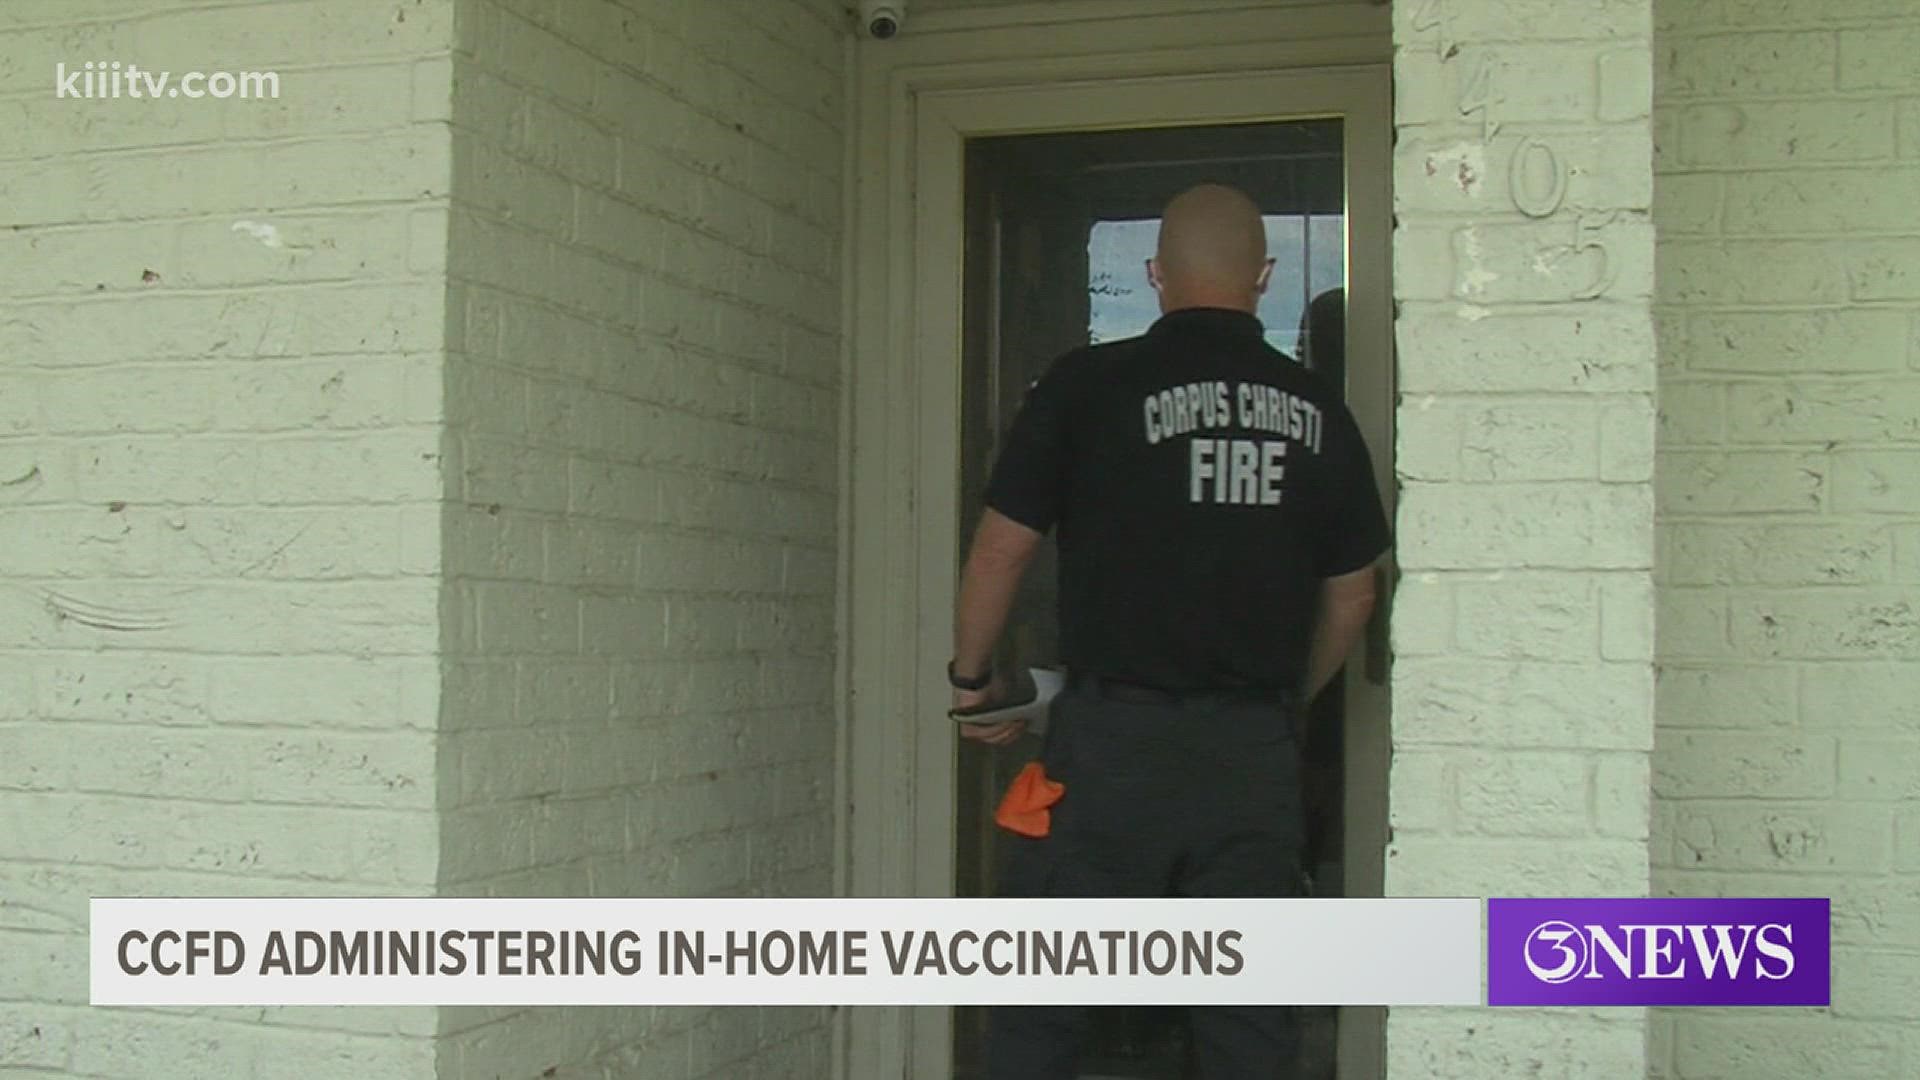 Over the past two weeks, firefighters have administered over 300 vaccines.